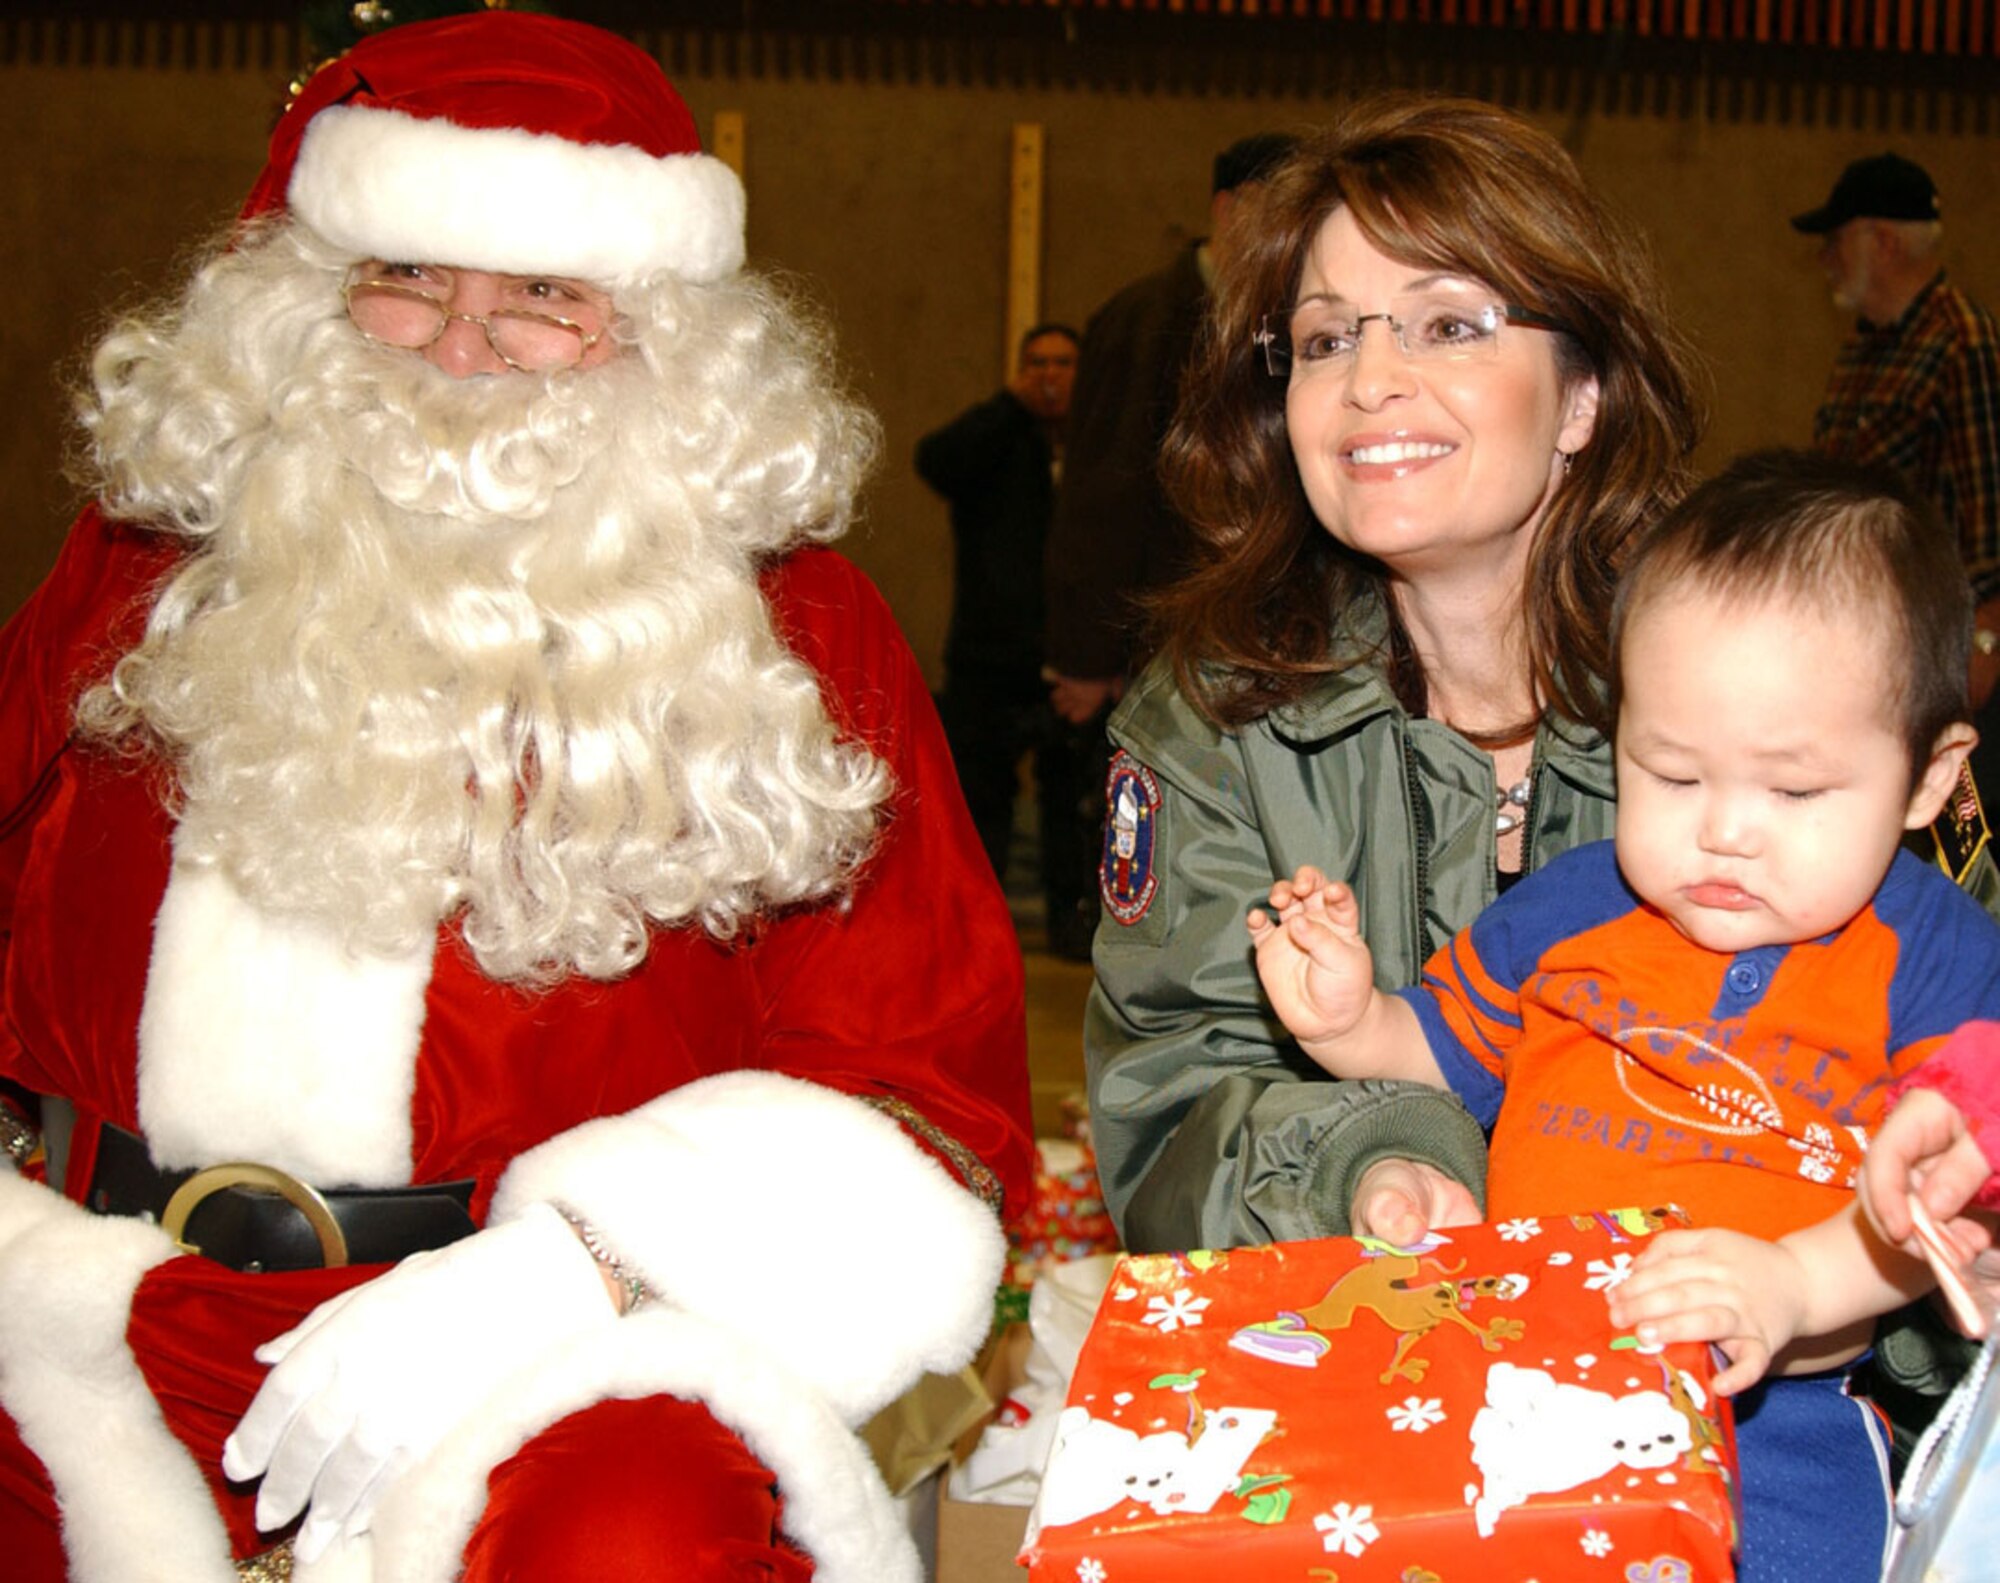 Alaska Gov. Sarah Palin helps Santa pass out gifts during Operation Santa Claus 2008 Dec. 6 in Kivalina, Alaska. Operation Santa Claus, an Alaska National Guard community relations and support program, provides toys, books and school supplies for young people in communities across the state. (U.S. Army photo/Spc. Paizley Ramsey)
